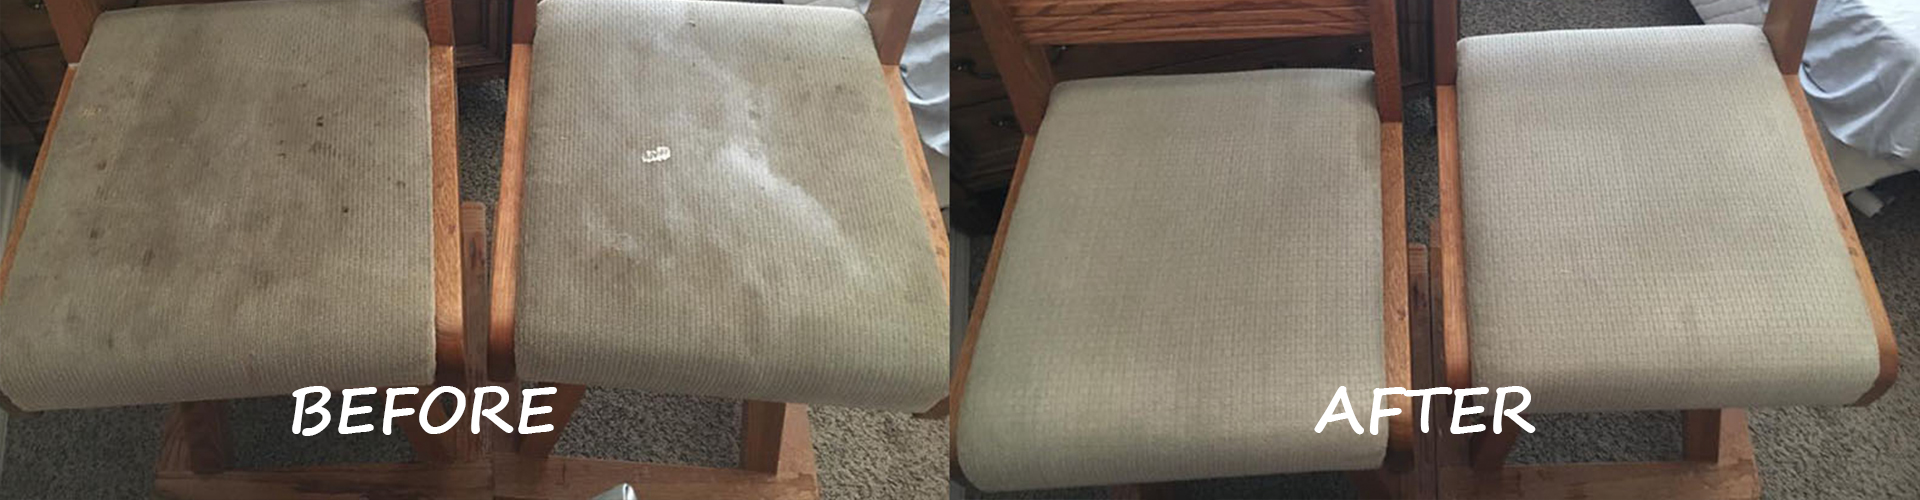 before after chair